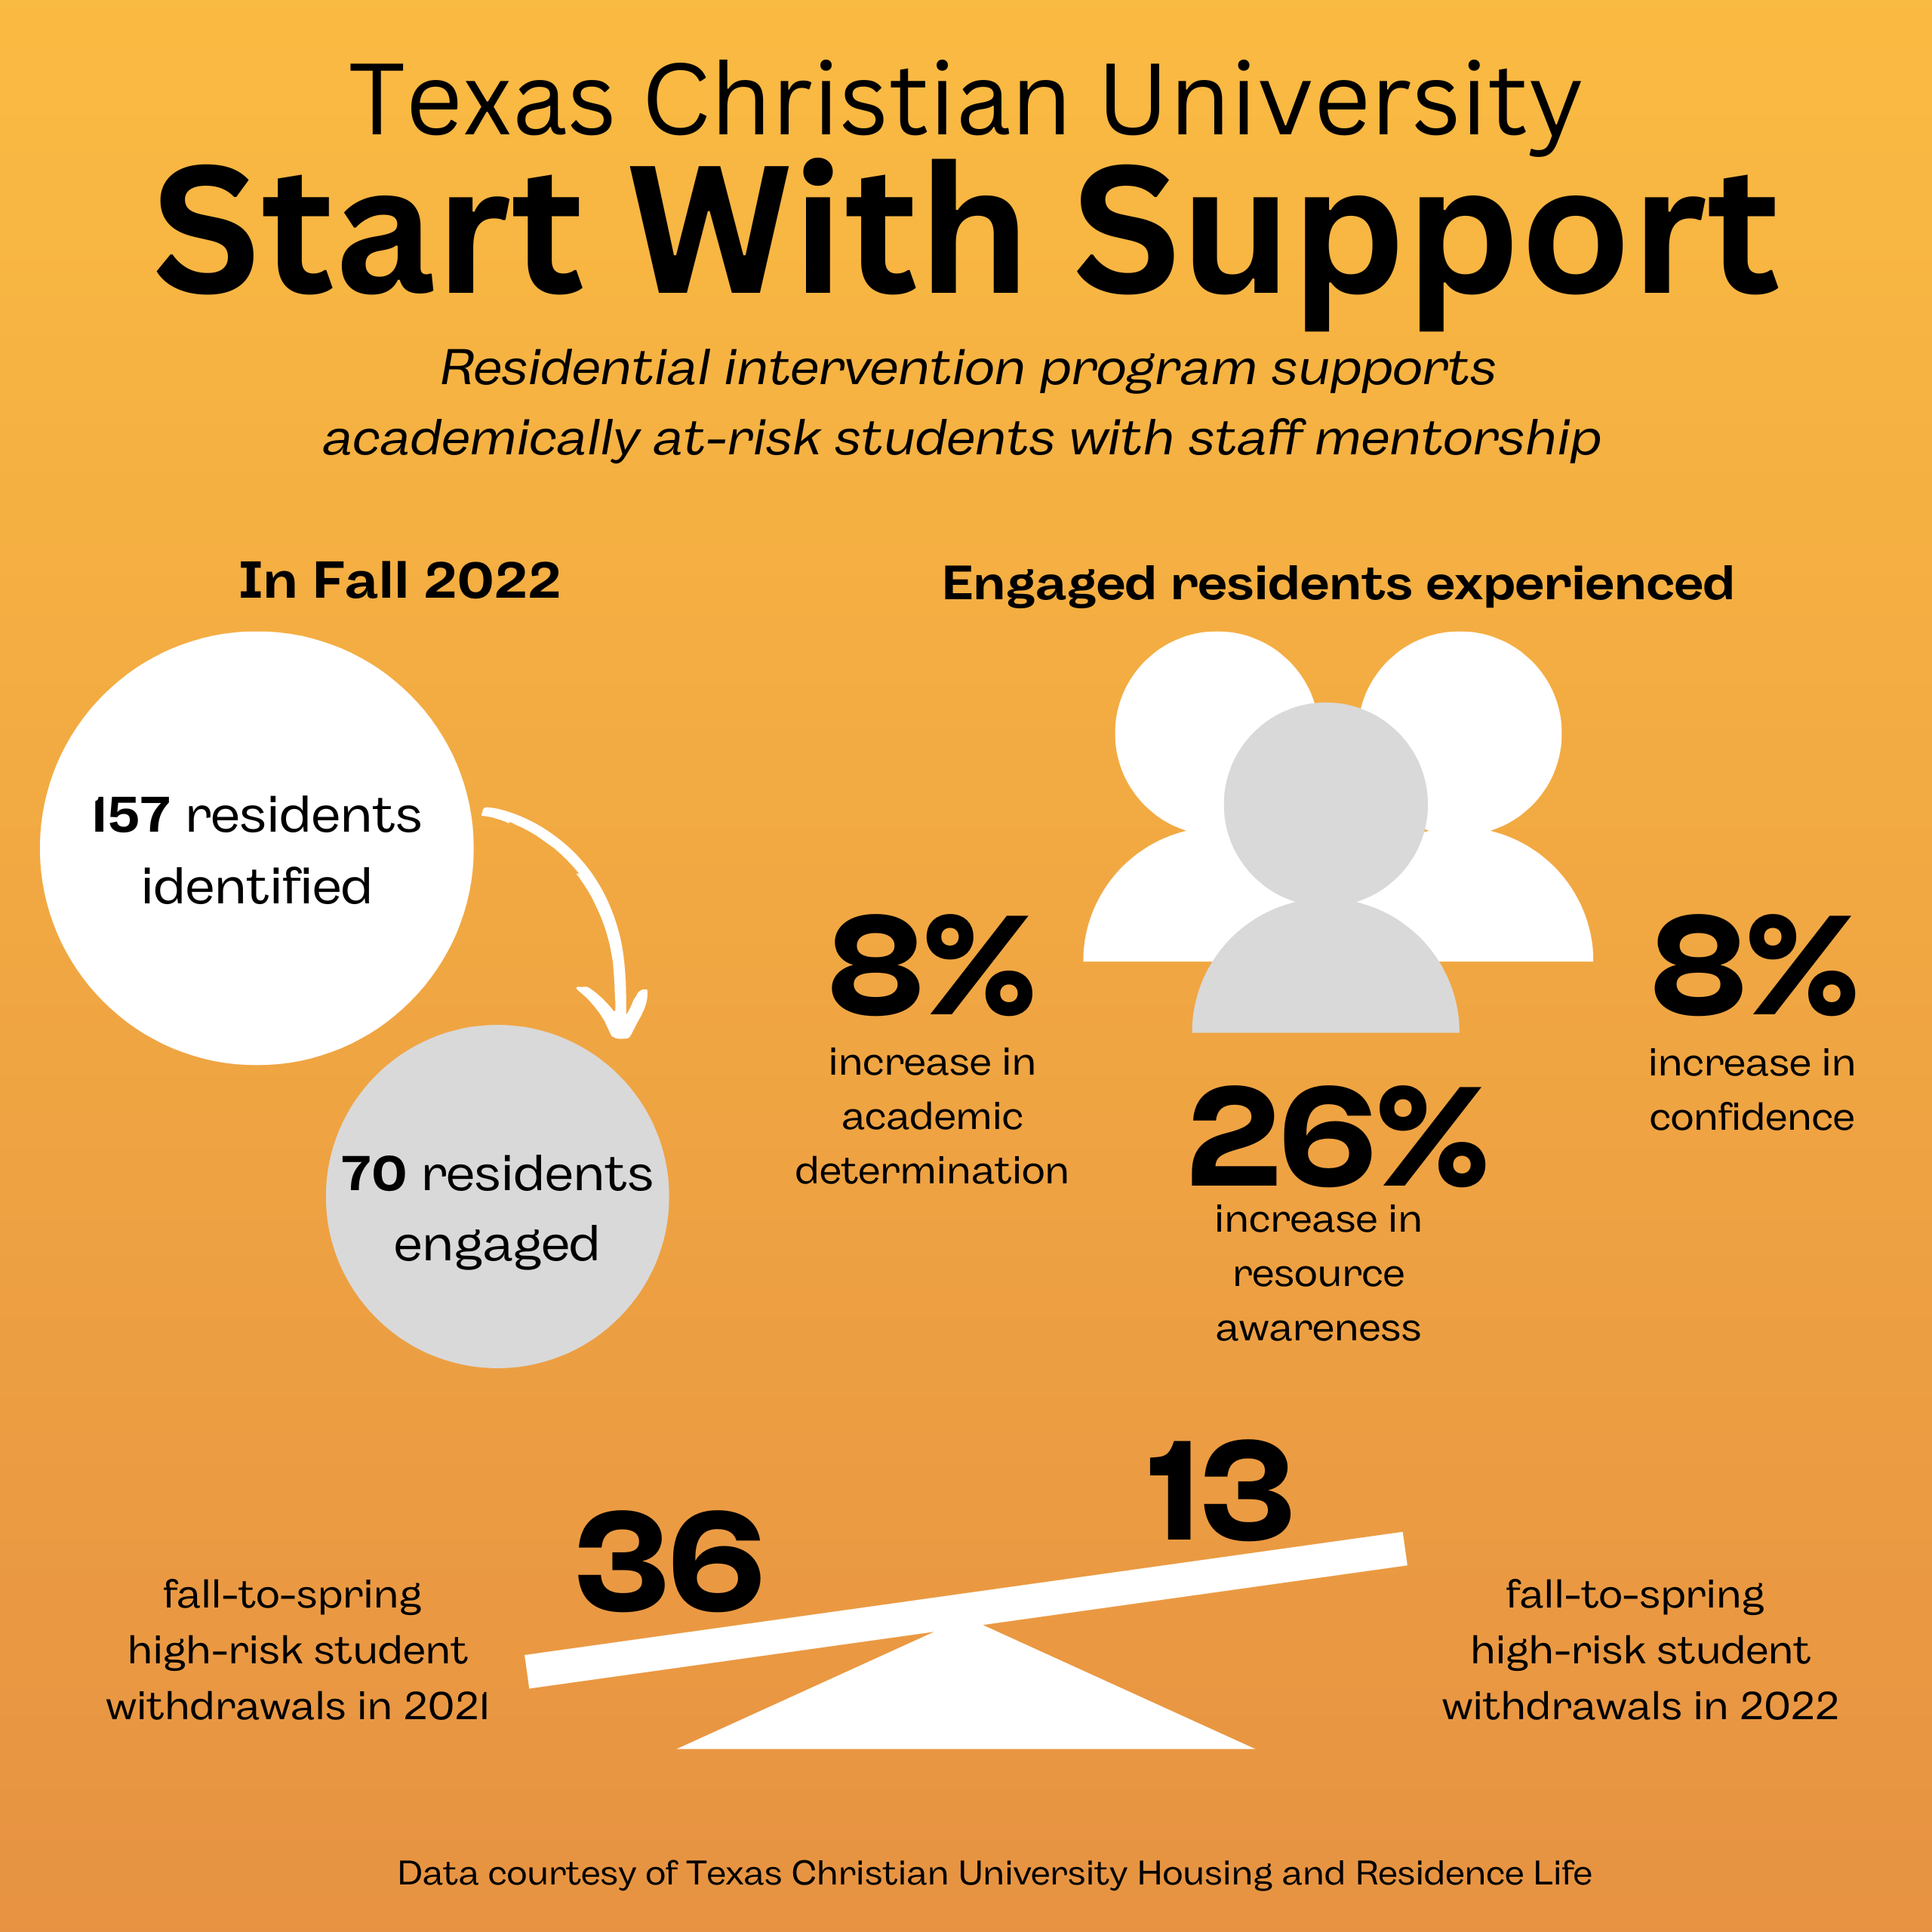 An infographic with statistics around Texas Christian University's Start With Support program.